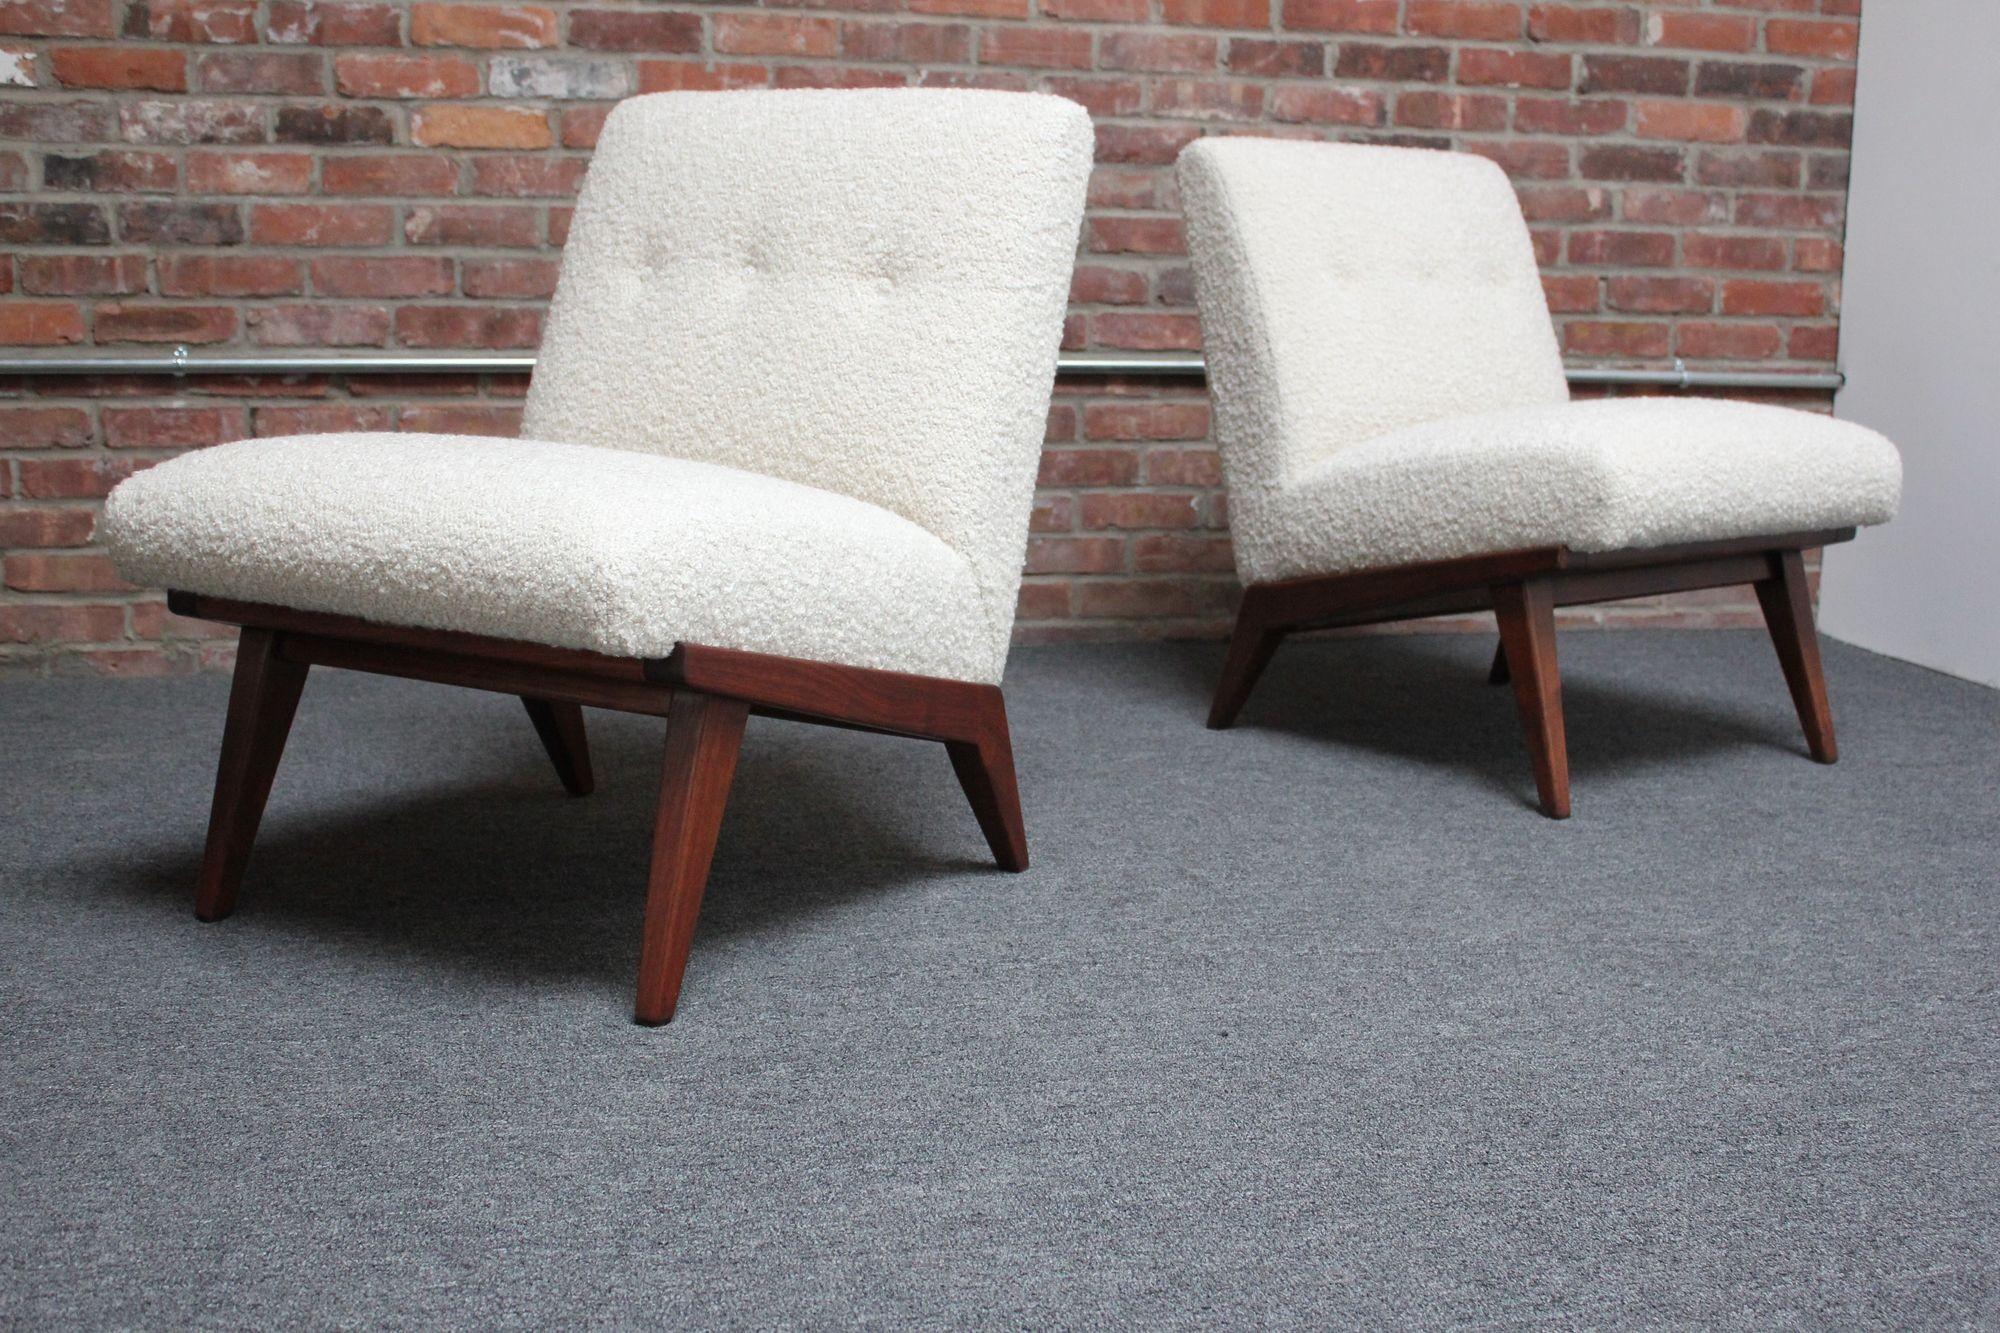 Jens Risom for H.G. Knoll Associates armless slipper chairs composed of upholstered seats supported by walnut bases (first appearing in the 1942 Knoll catalog). 
There is a slight design disparity between the two chairs - the wood joinery in the